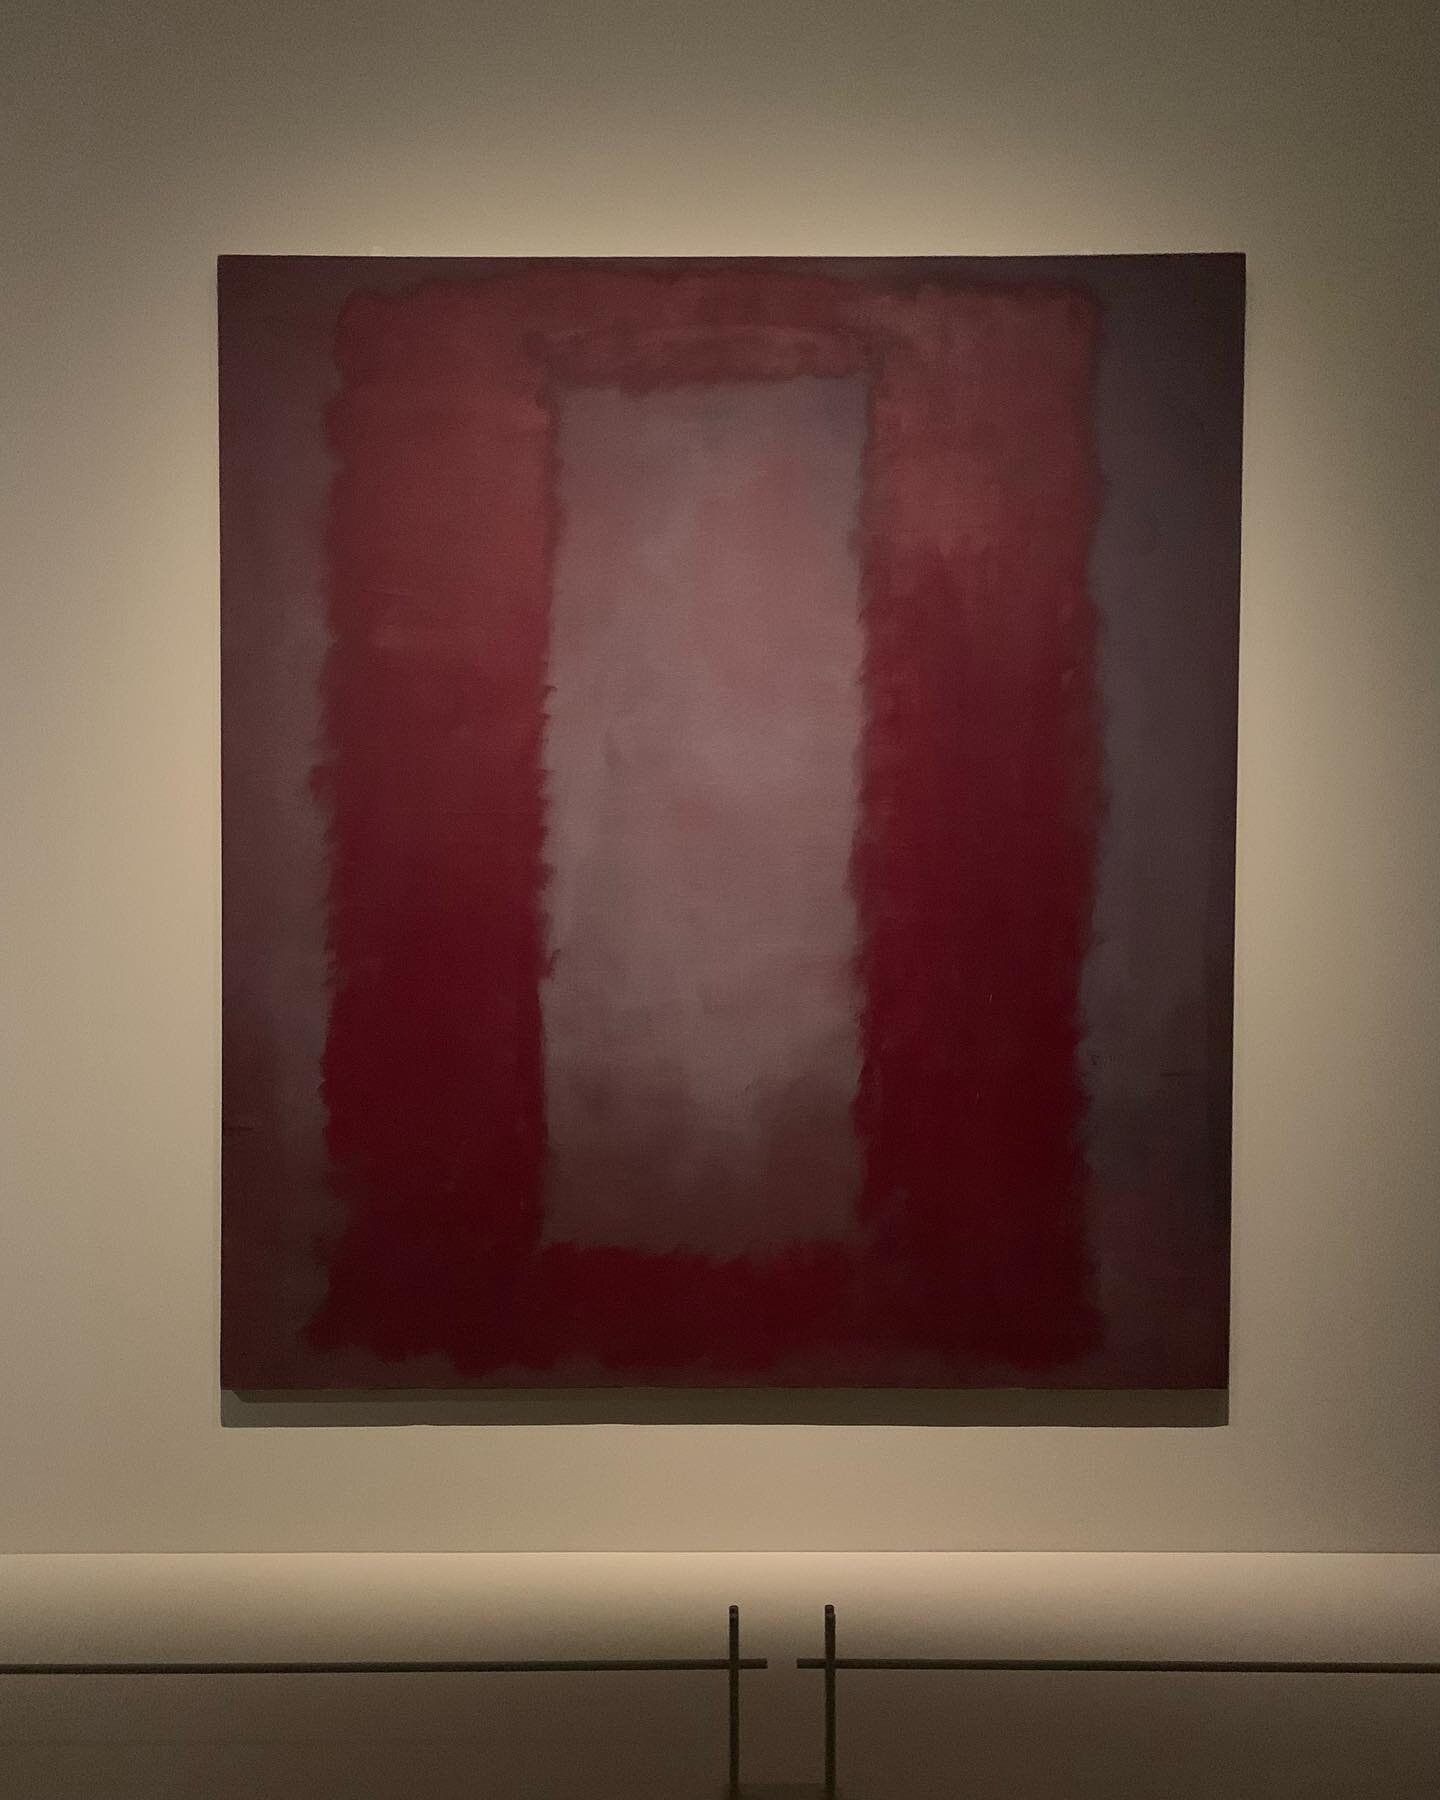 Could have looked at this one all day. Feeling fortunate to have caught the #Rothko retrospective at the @fondationlv before it finishes next month. Amazing seeing so many of his paintings in one place, and the Seagram Murals and blackform paintings 